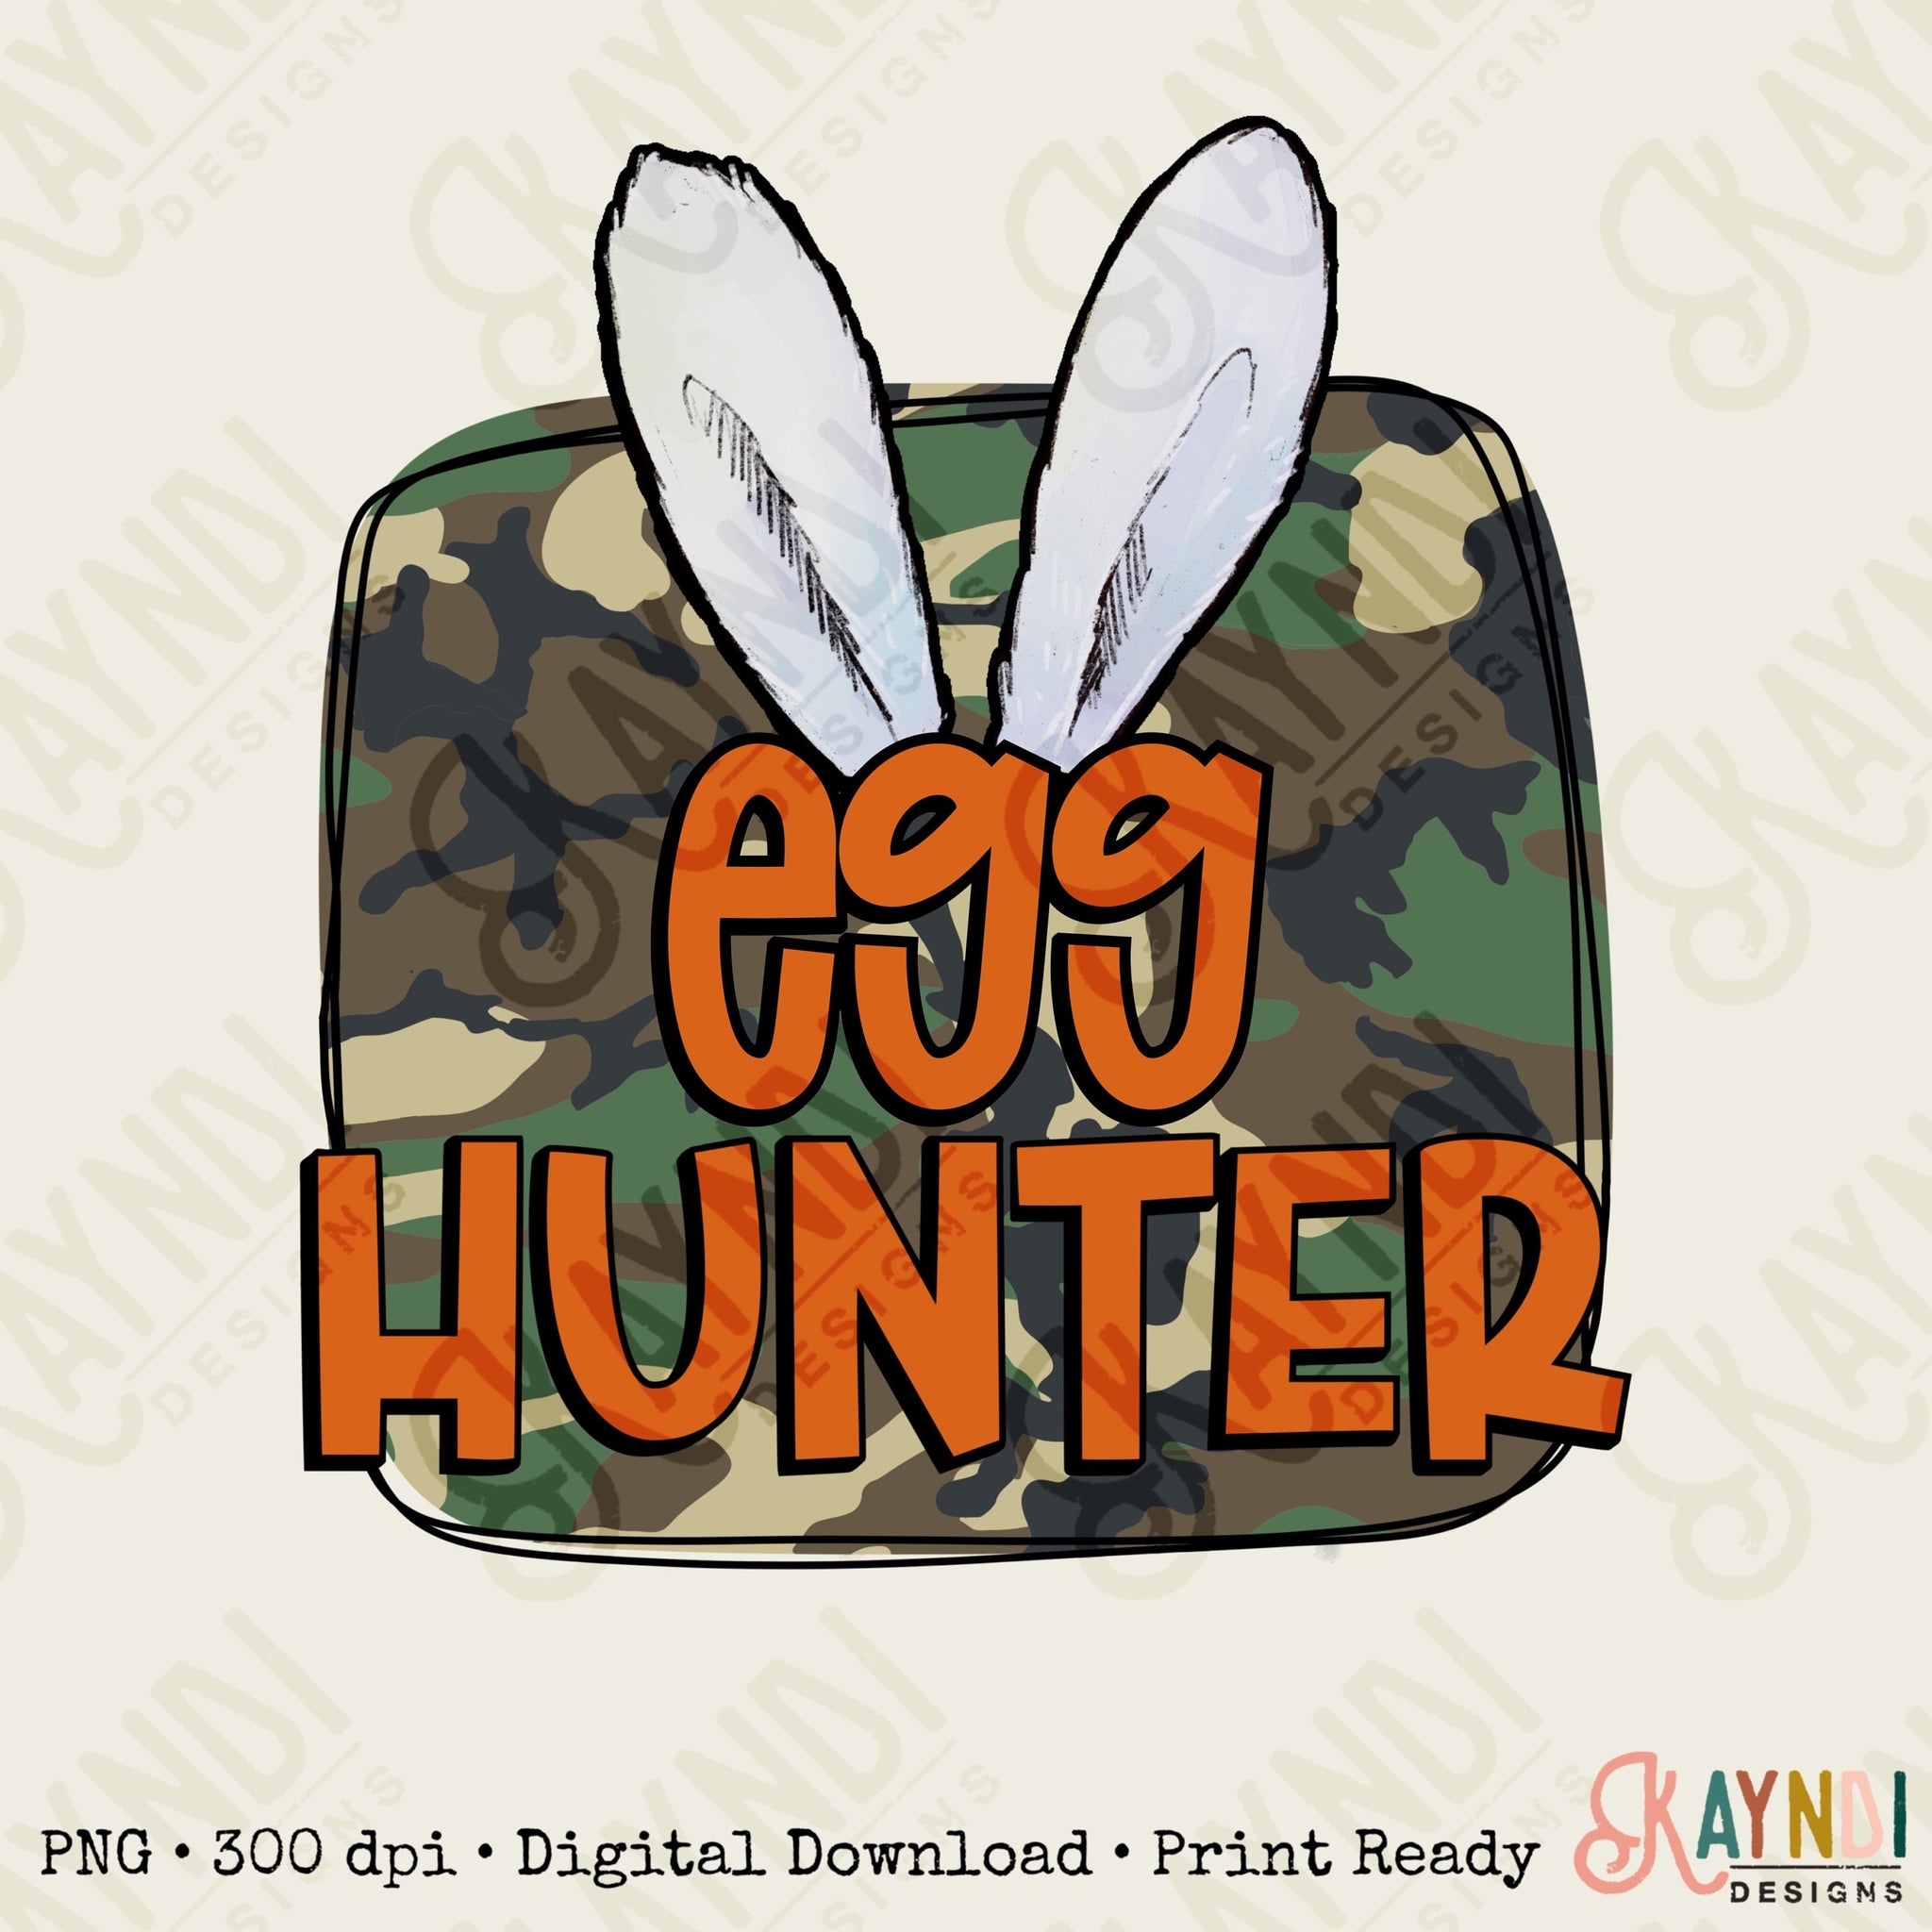 Egg Hunting Bunny Sublimation Design PNG Digital Download Printable Boy Boys Easter Egg Hunting Camo Camouflage Hunter Country Southern Eggs